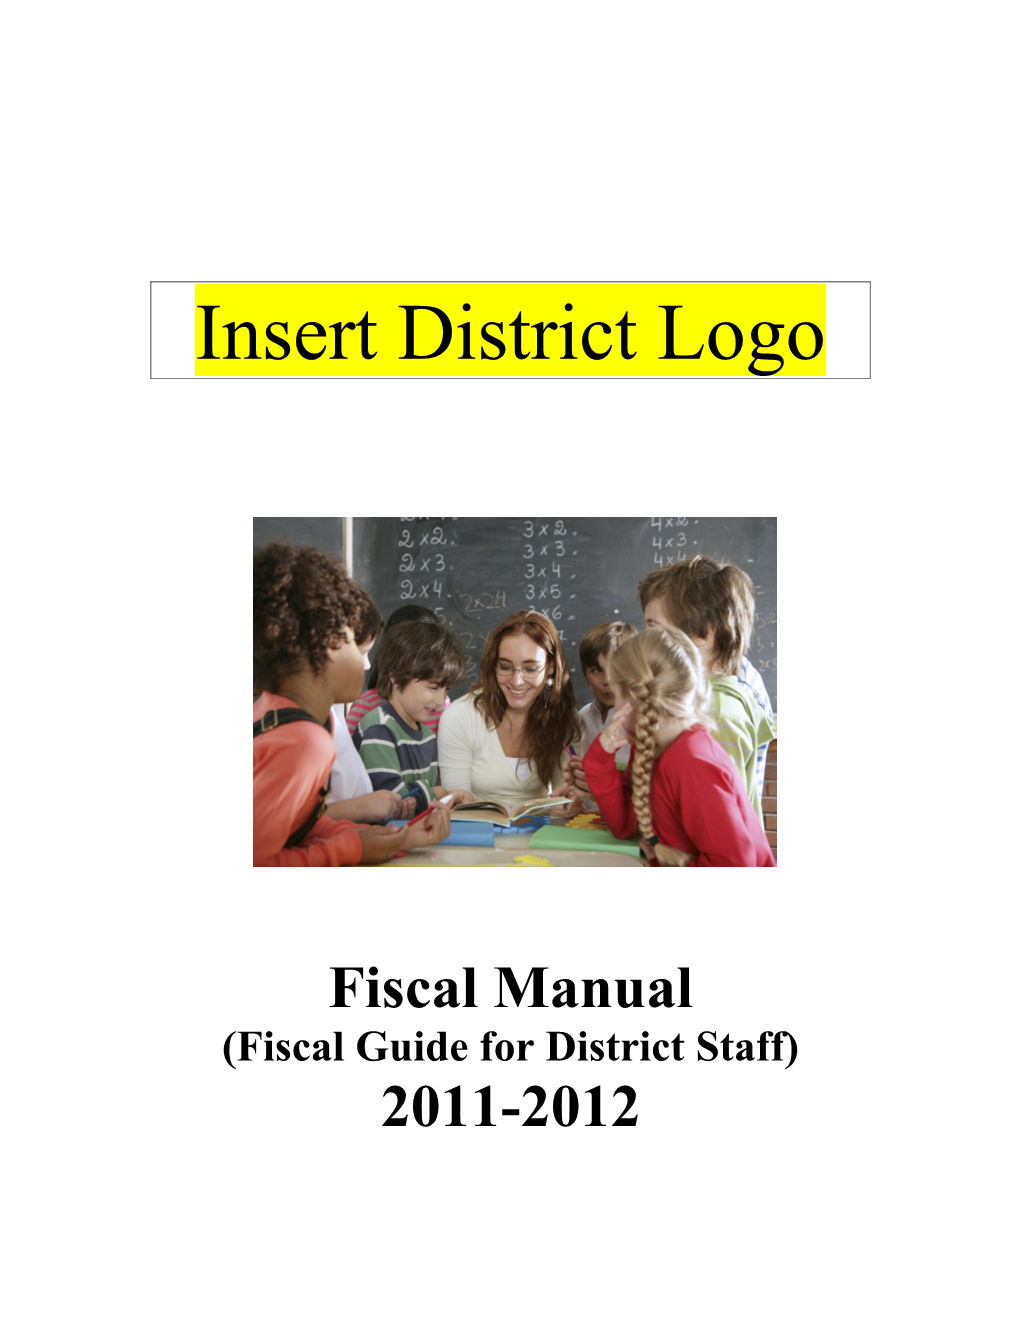 Fiscal Guide for District Staff